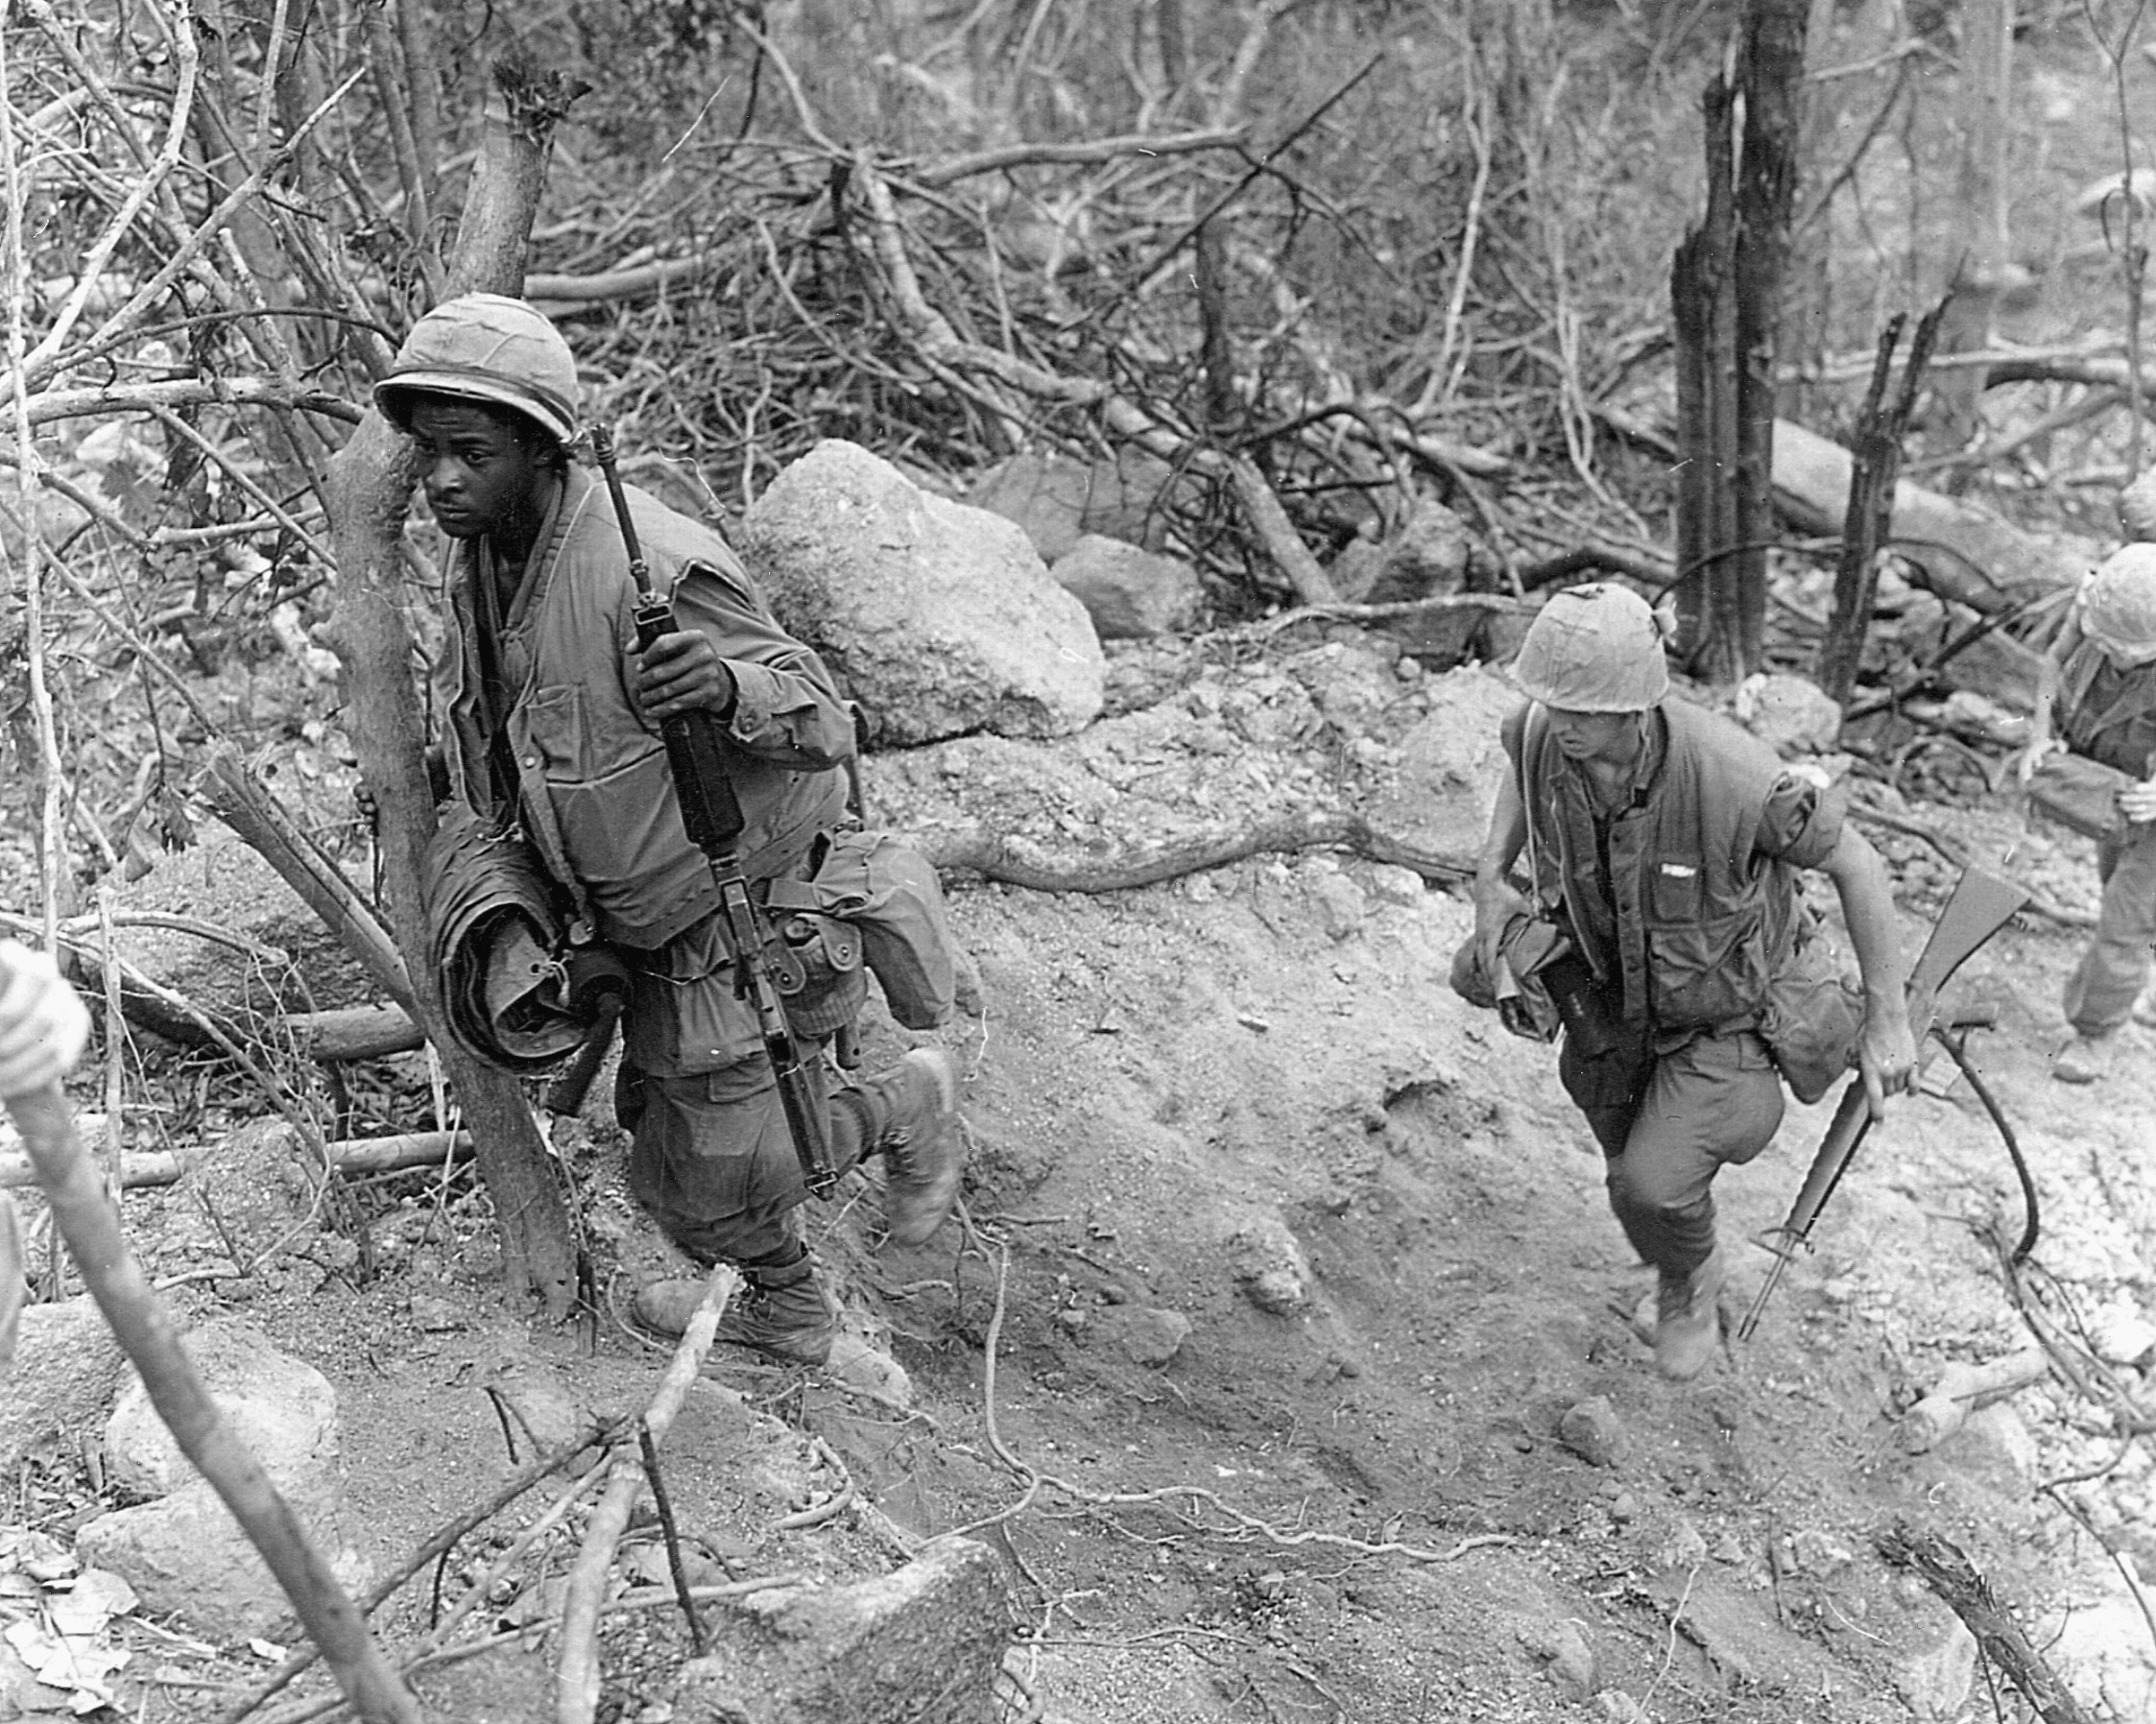 U.S. Marines advance up a barren hillside while searching the area for NVA troops and weapons.